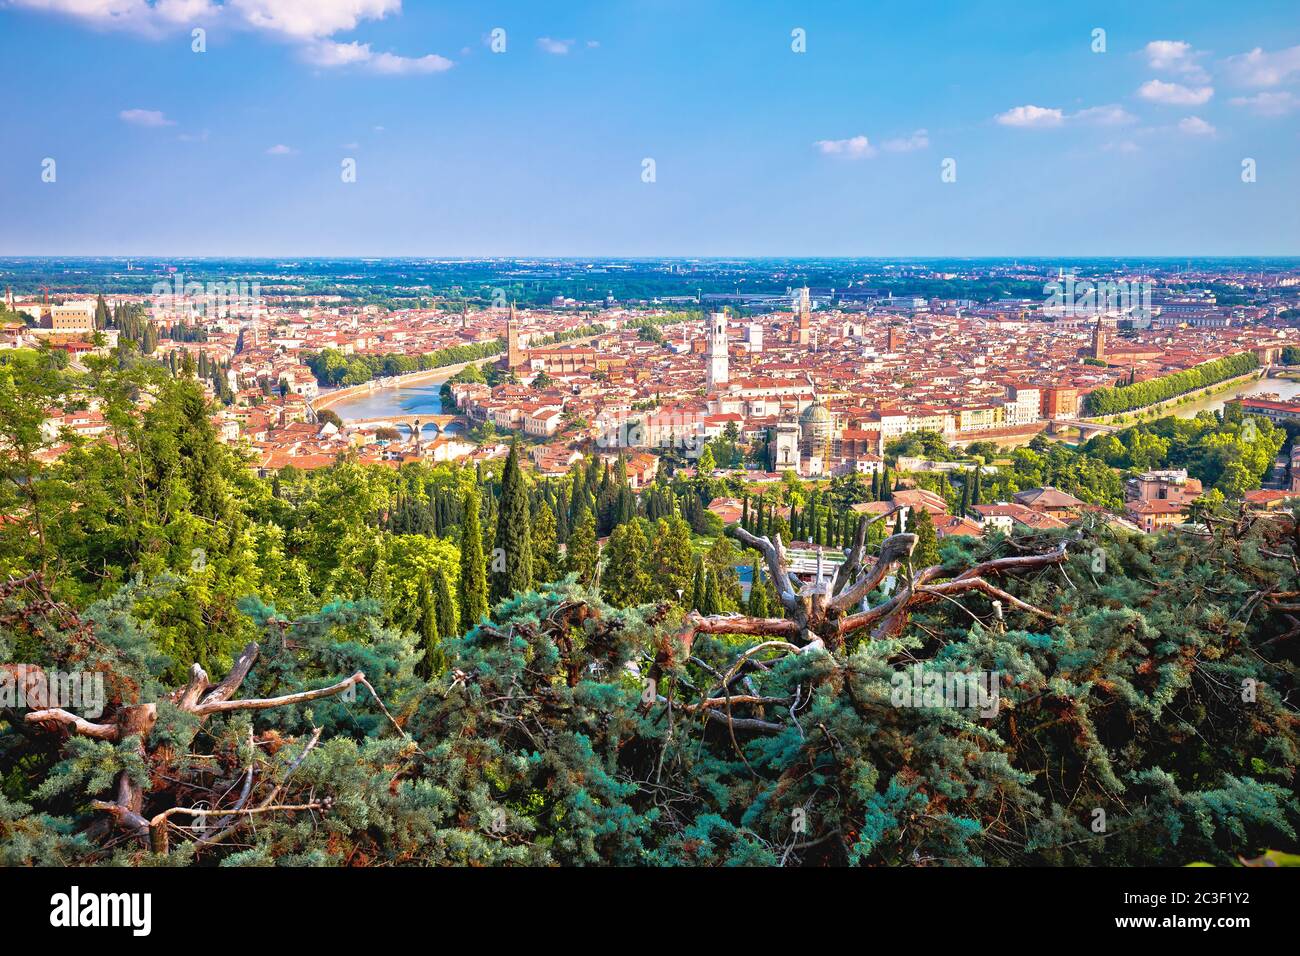 City of Verona old center and Adige river panoramic view from hill Stock Photo